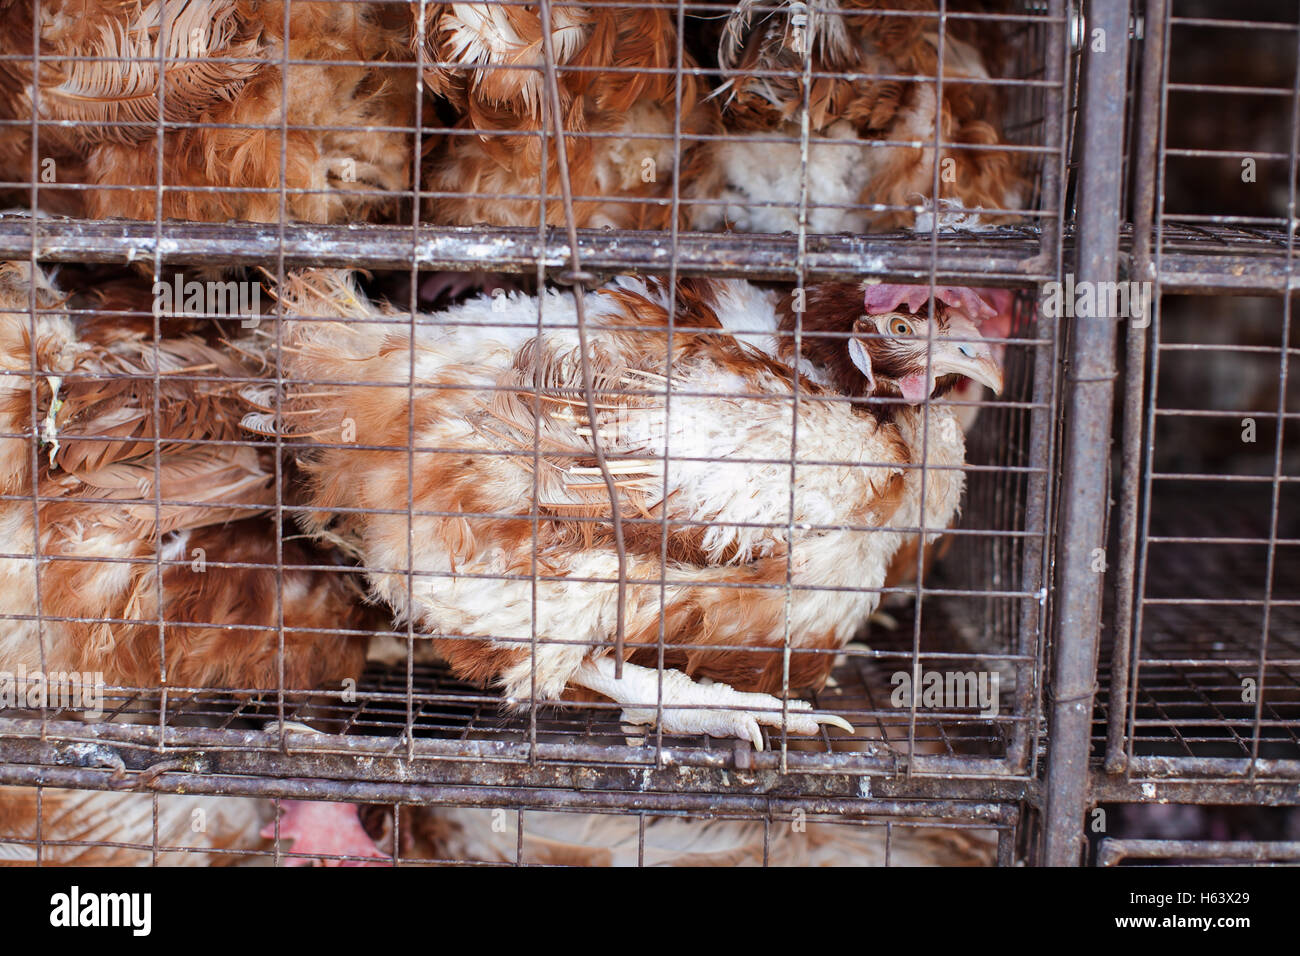 Chickens in a cage. Stock Photo